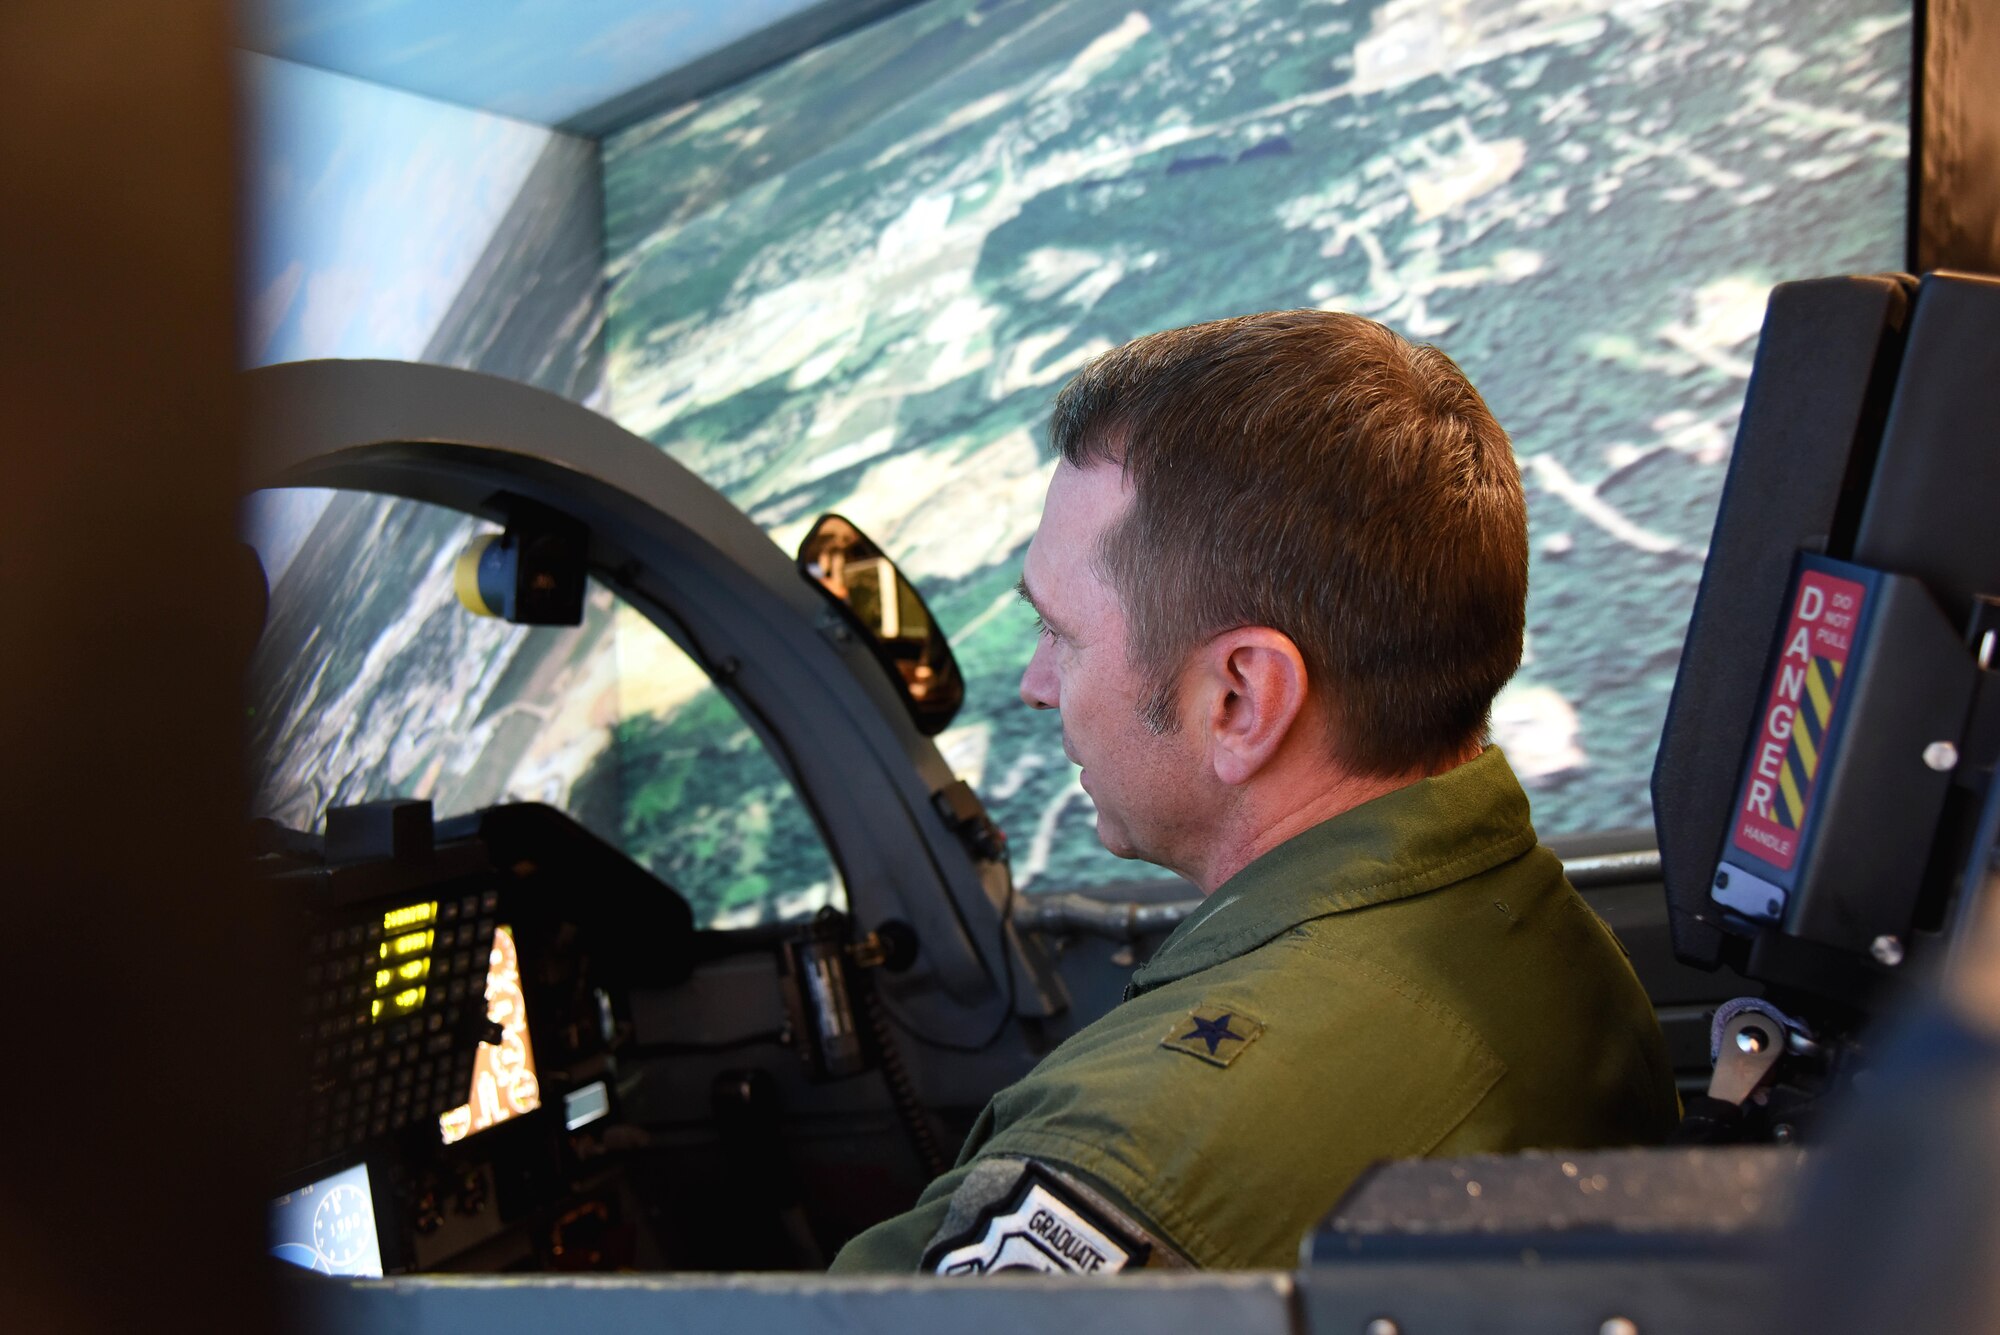 Brig. Gen. David Hicks, the Director of Strategy, Concepts, and Assessments, Deputy Chief of Staff for Strategic Plans and Requirements, Headquarters U.S. Air Force in Washington, D.C., flies in a T-38C Talon flight simulator, Nov. 17, 2017, on Columbus Air Force Base, Mississippi. Hicks spoke at Specialized Undergraduate Pilot Training Class 18-02’s graduation ceremony and took the rest of the day to learn about Columbus AFB and see the changes in pilot training since his time at Columbus AFB 27 years ago. (U.S. Air Force photo by Melissa Dublin)